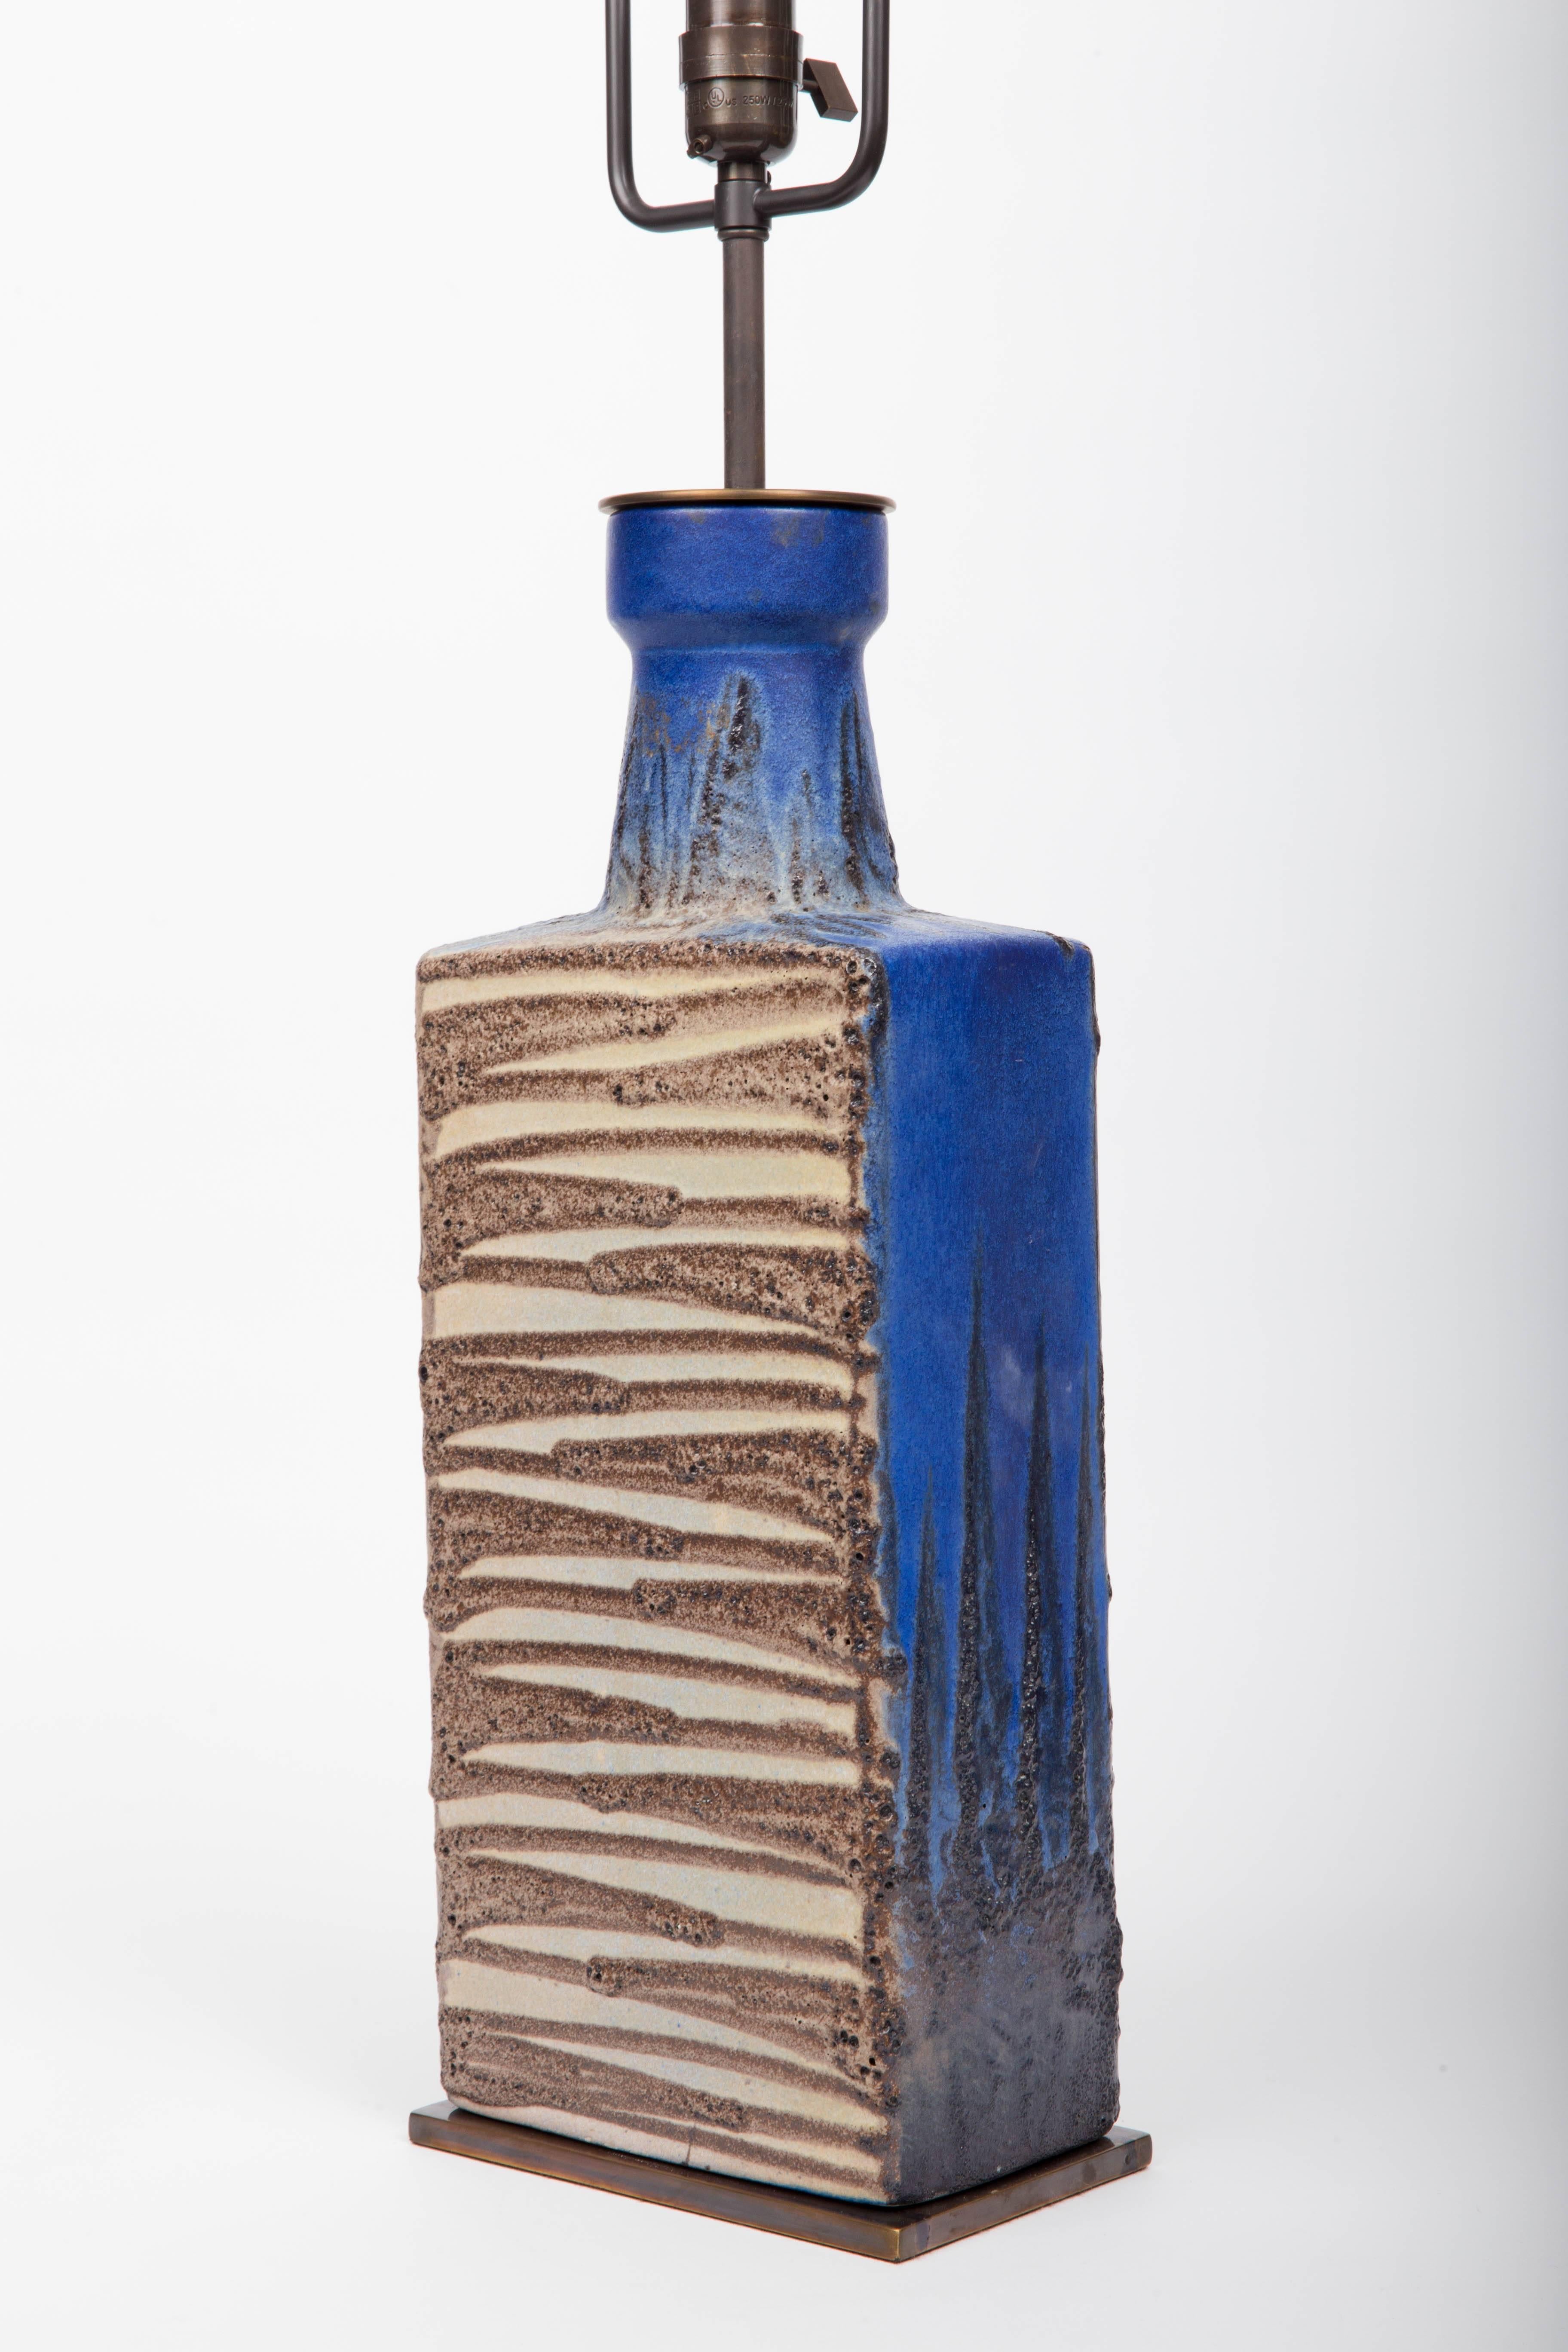 20th Century Modernist Blue and Brown Ceramic Vase, Converted into Lamp